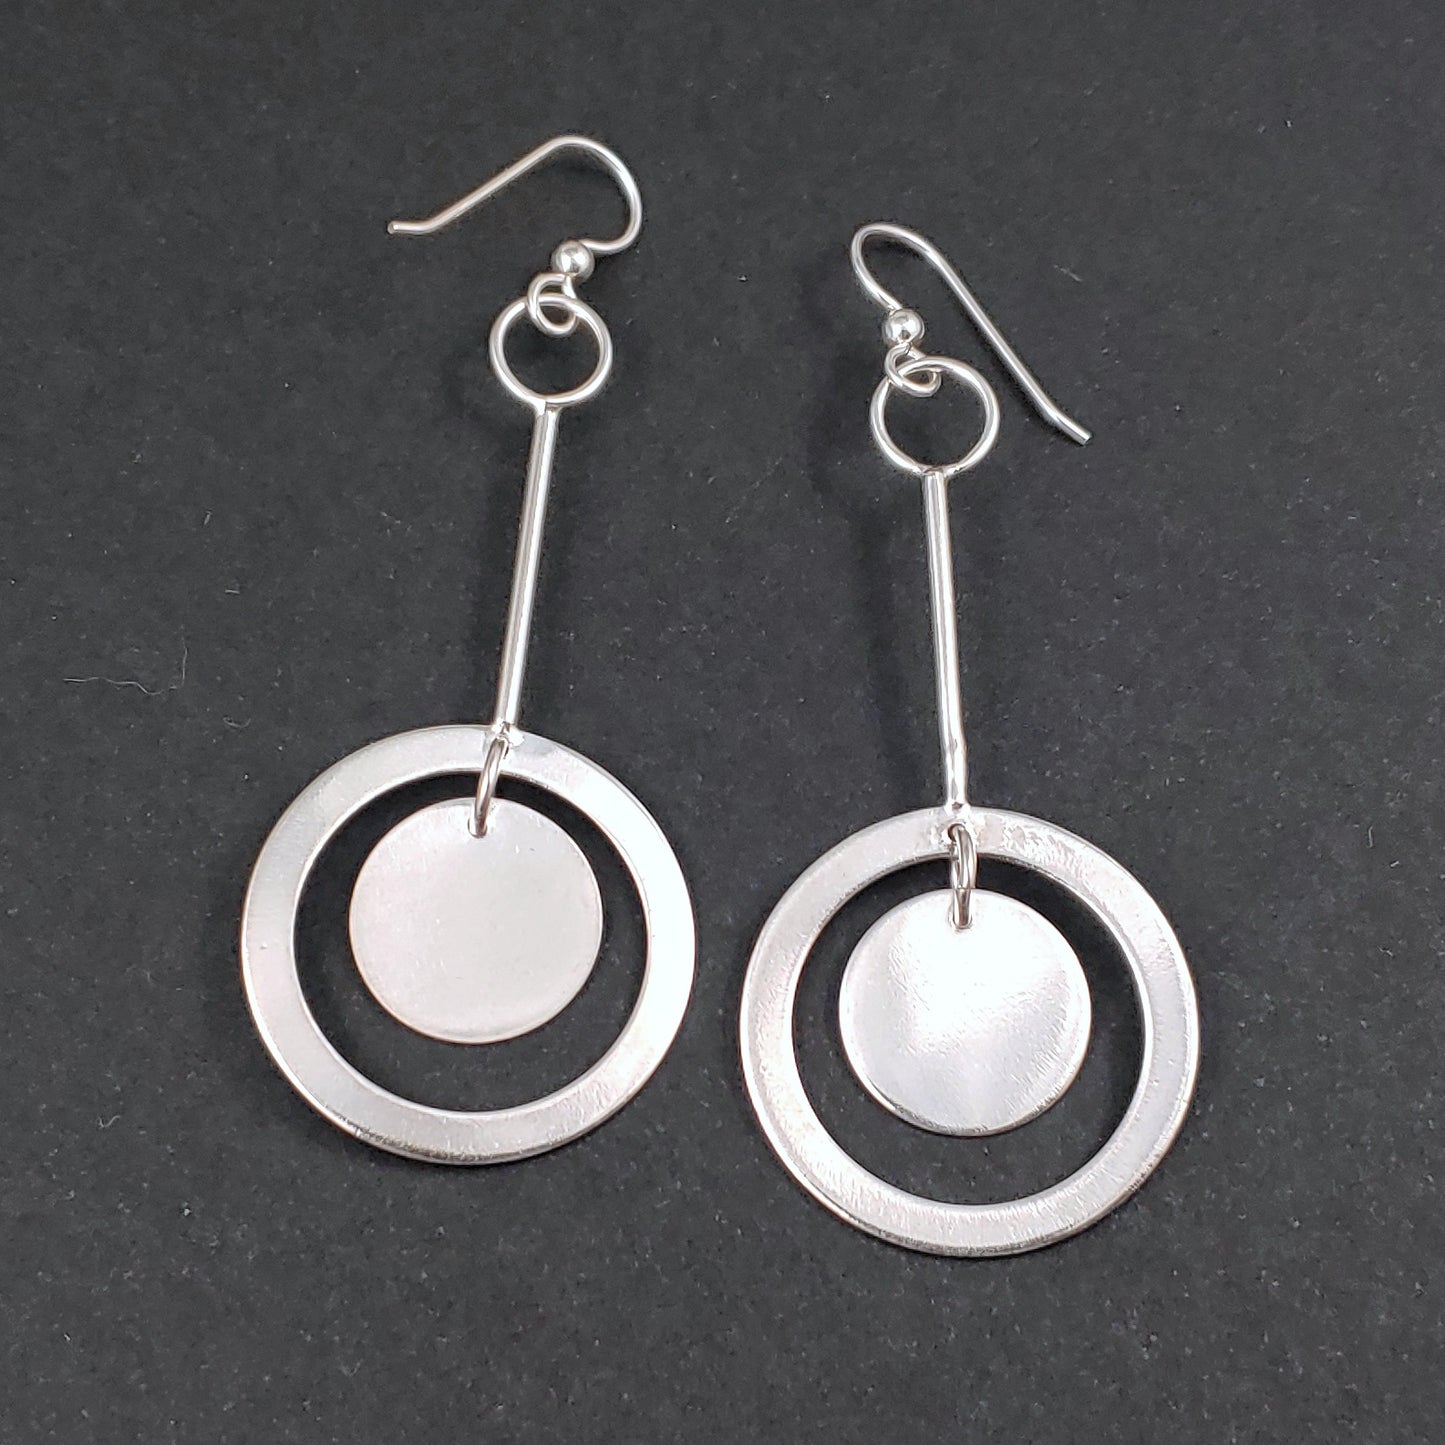 The Double Round Earrings - Sterling Silver